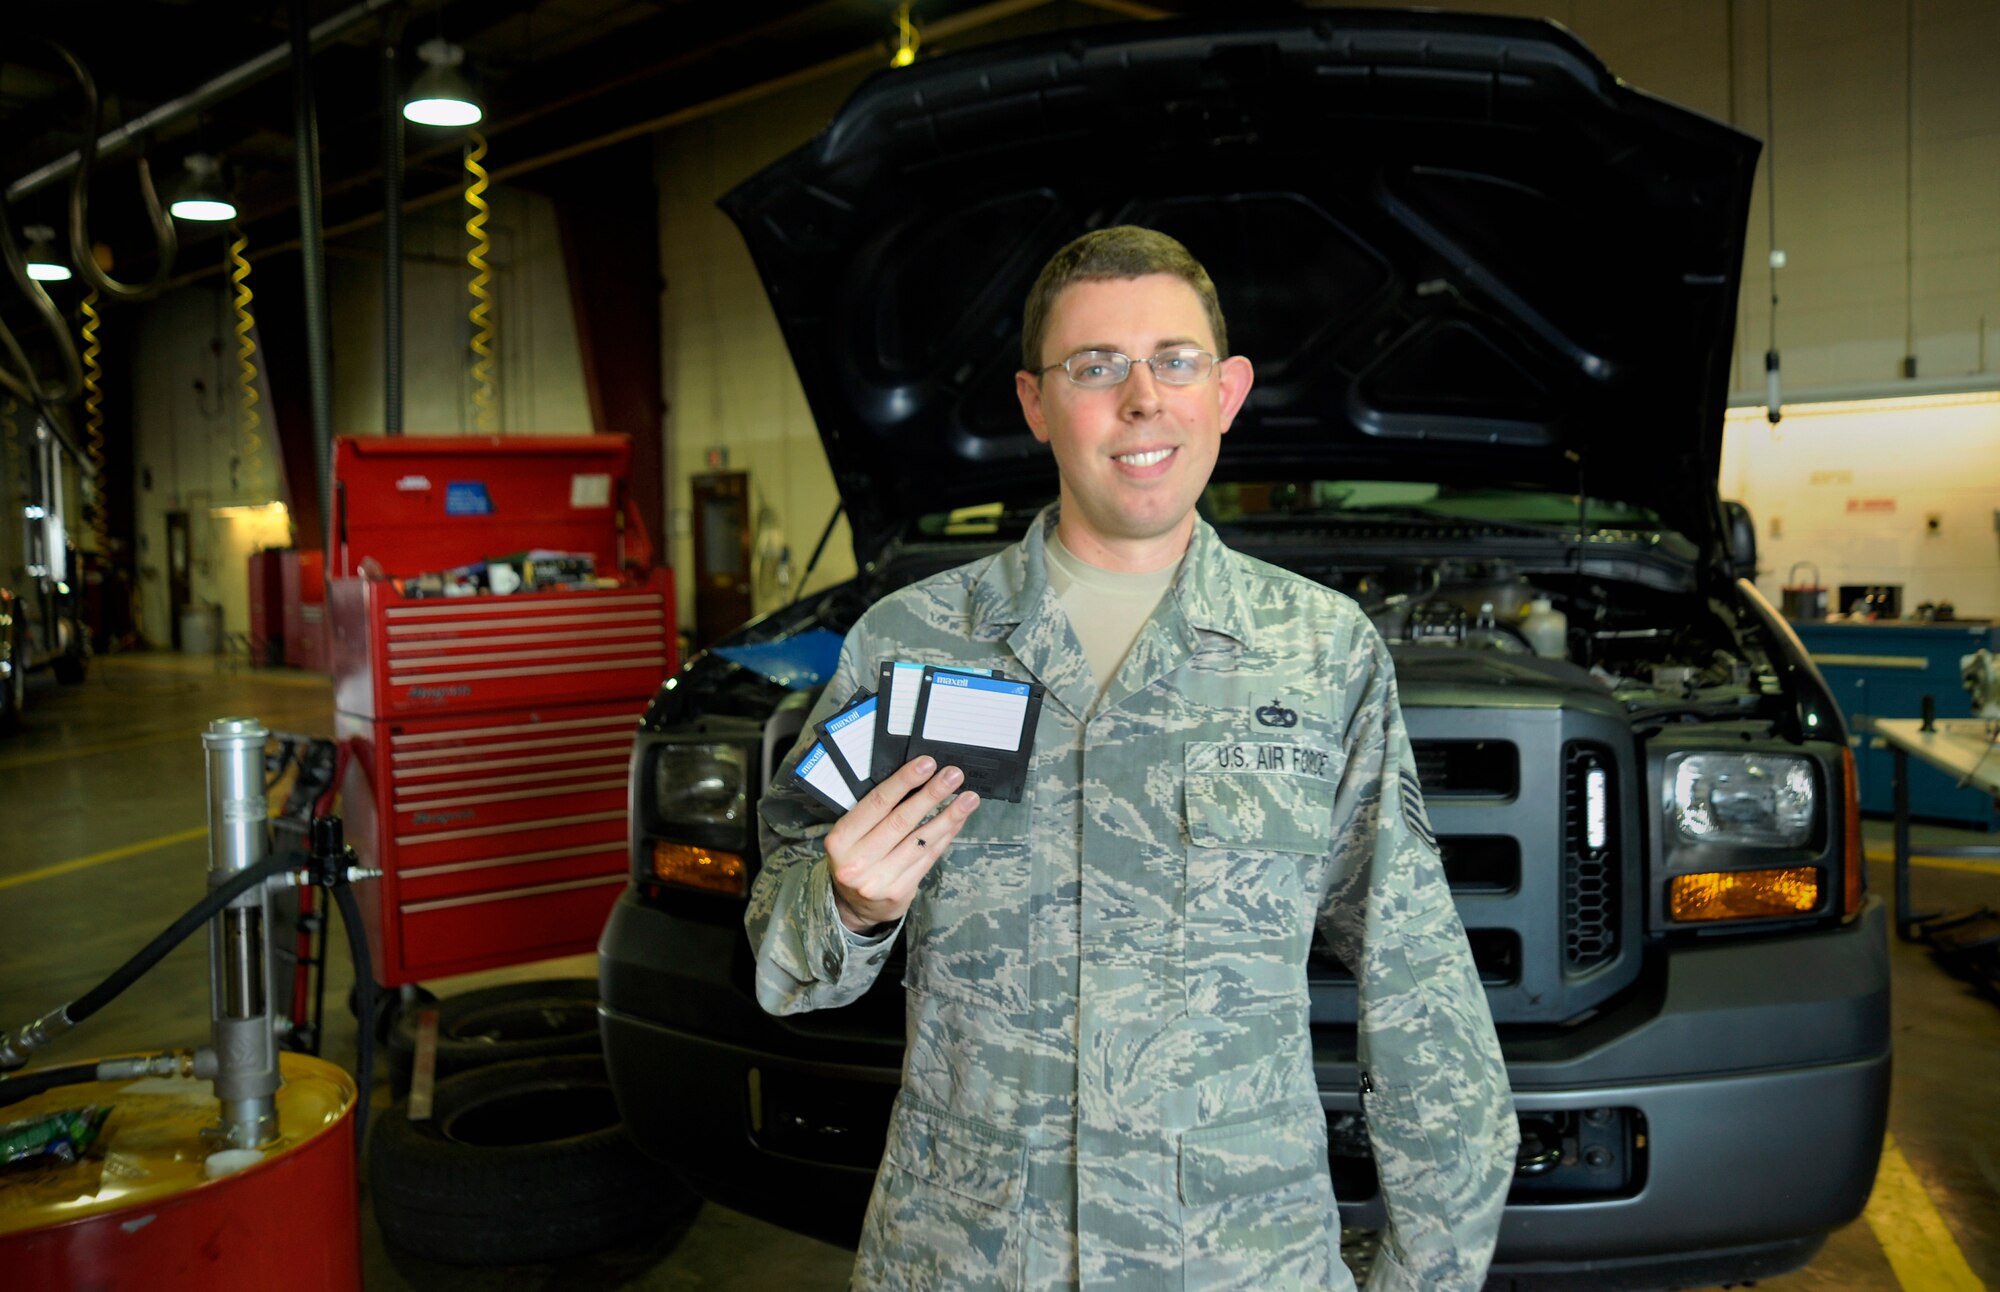 Oregon Air National Guard Tech. Sgt. Andrew Saunders, a Vehicle Management and Analysis specialist for the 142nd Fighter Wing, shows off  a set of floppy disks used to run the On-Line Vehicle Interactive Management System (OLVIMS), a legacy system that is being phased out of use due in part to Saunders’ efforts., Oct. 3, 2015, Portland Air National Guard Base, Ore. (U.S. Air National Guard photo by Staff Sgt. Brandon Boyd, 142nd Fighter Wing Public Affairs/Released)